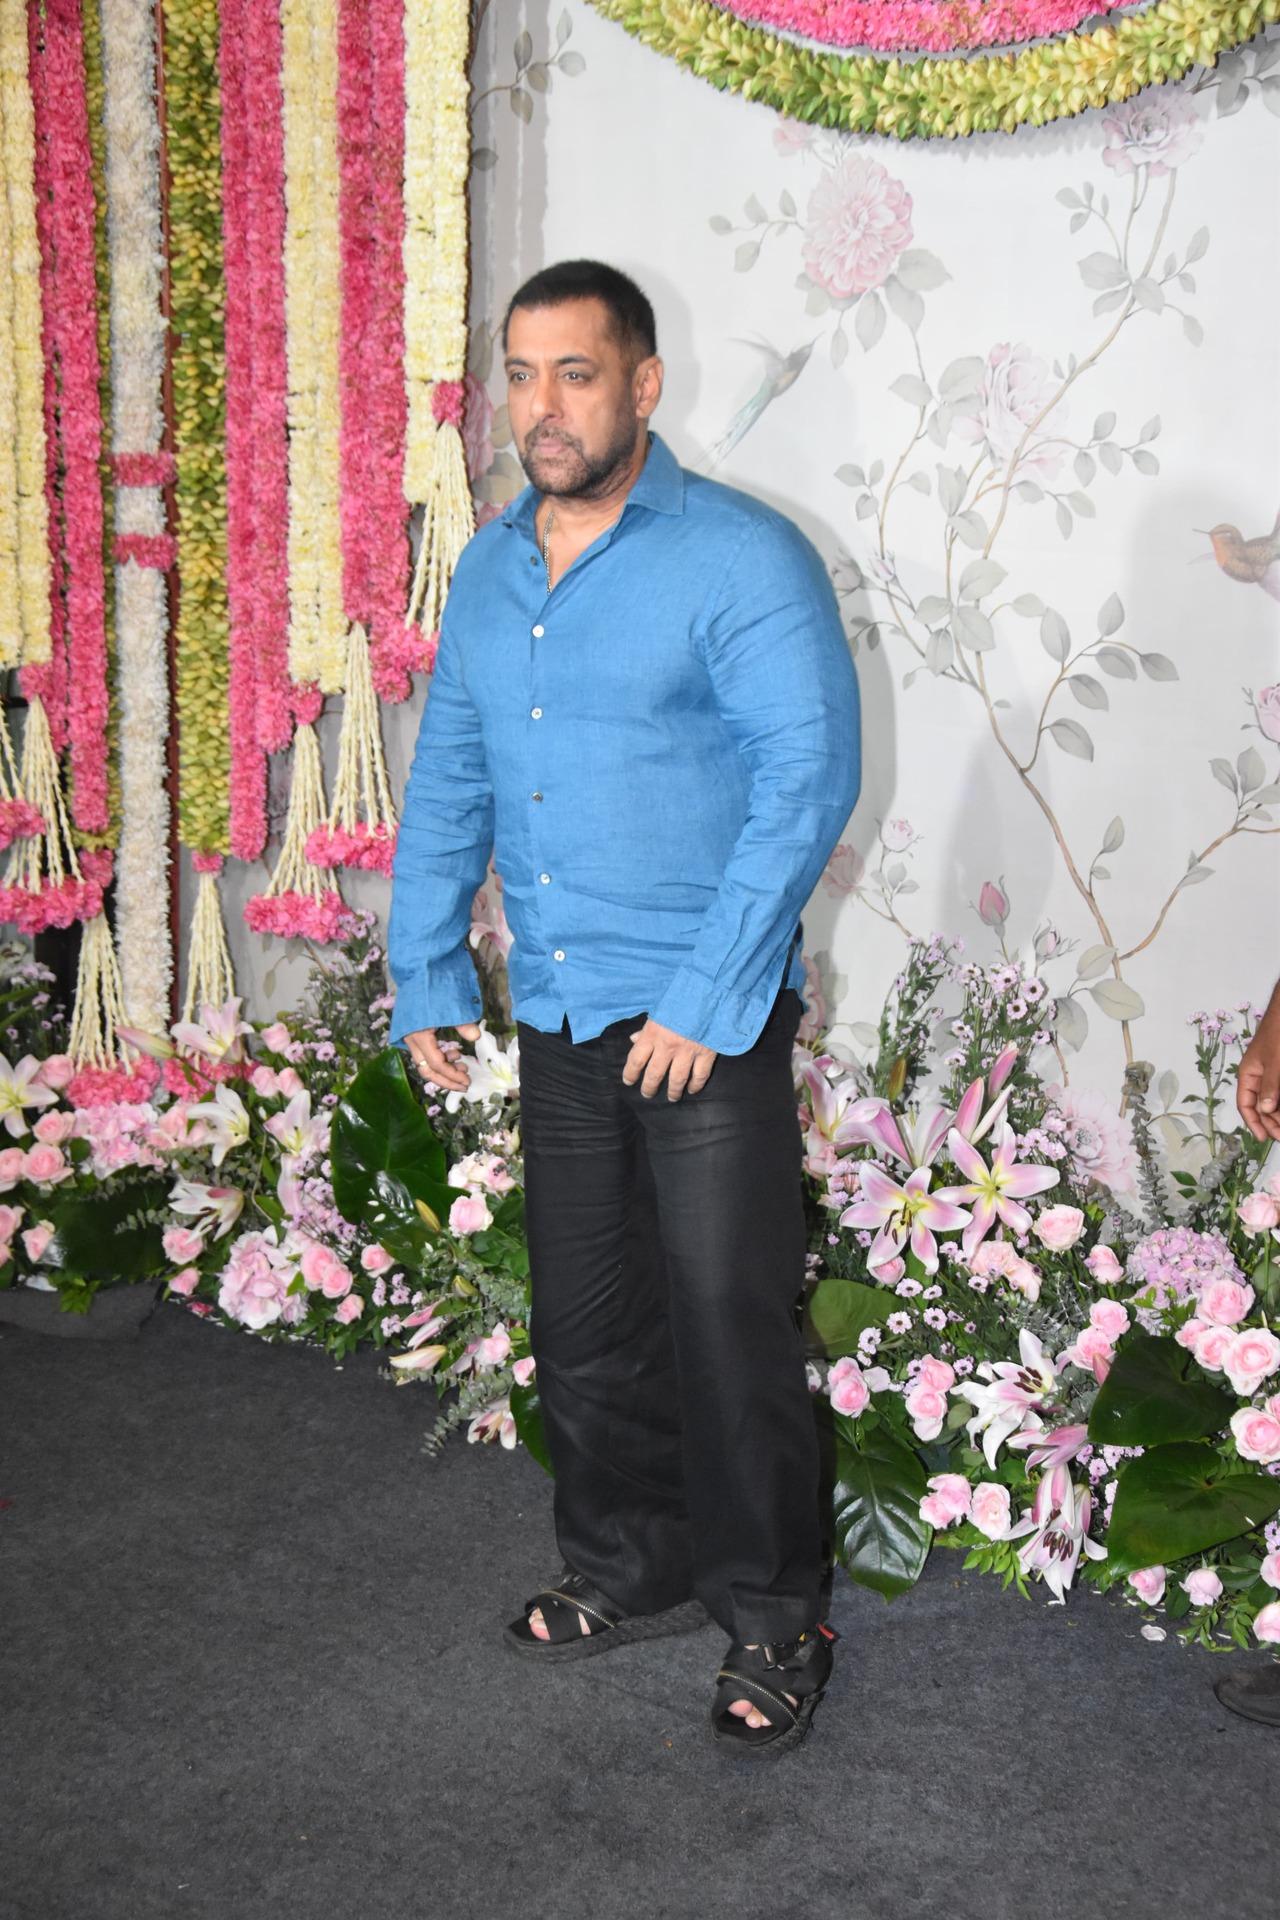 Salman looked dapper in a blue shirt and black jeans as he was clicked at the celebration